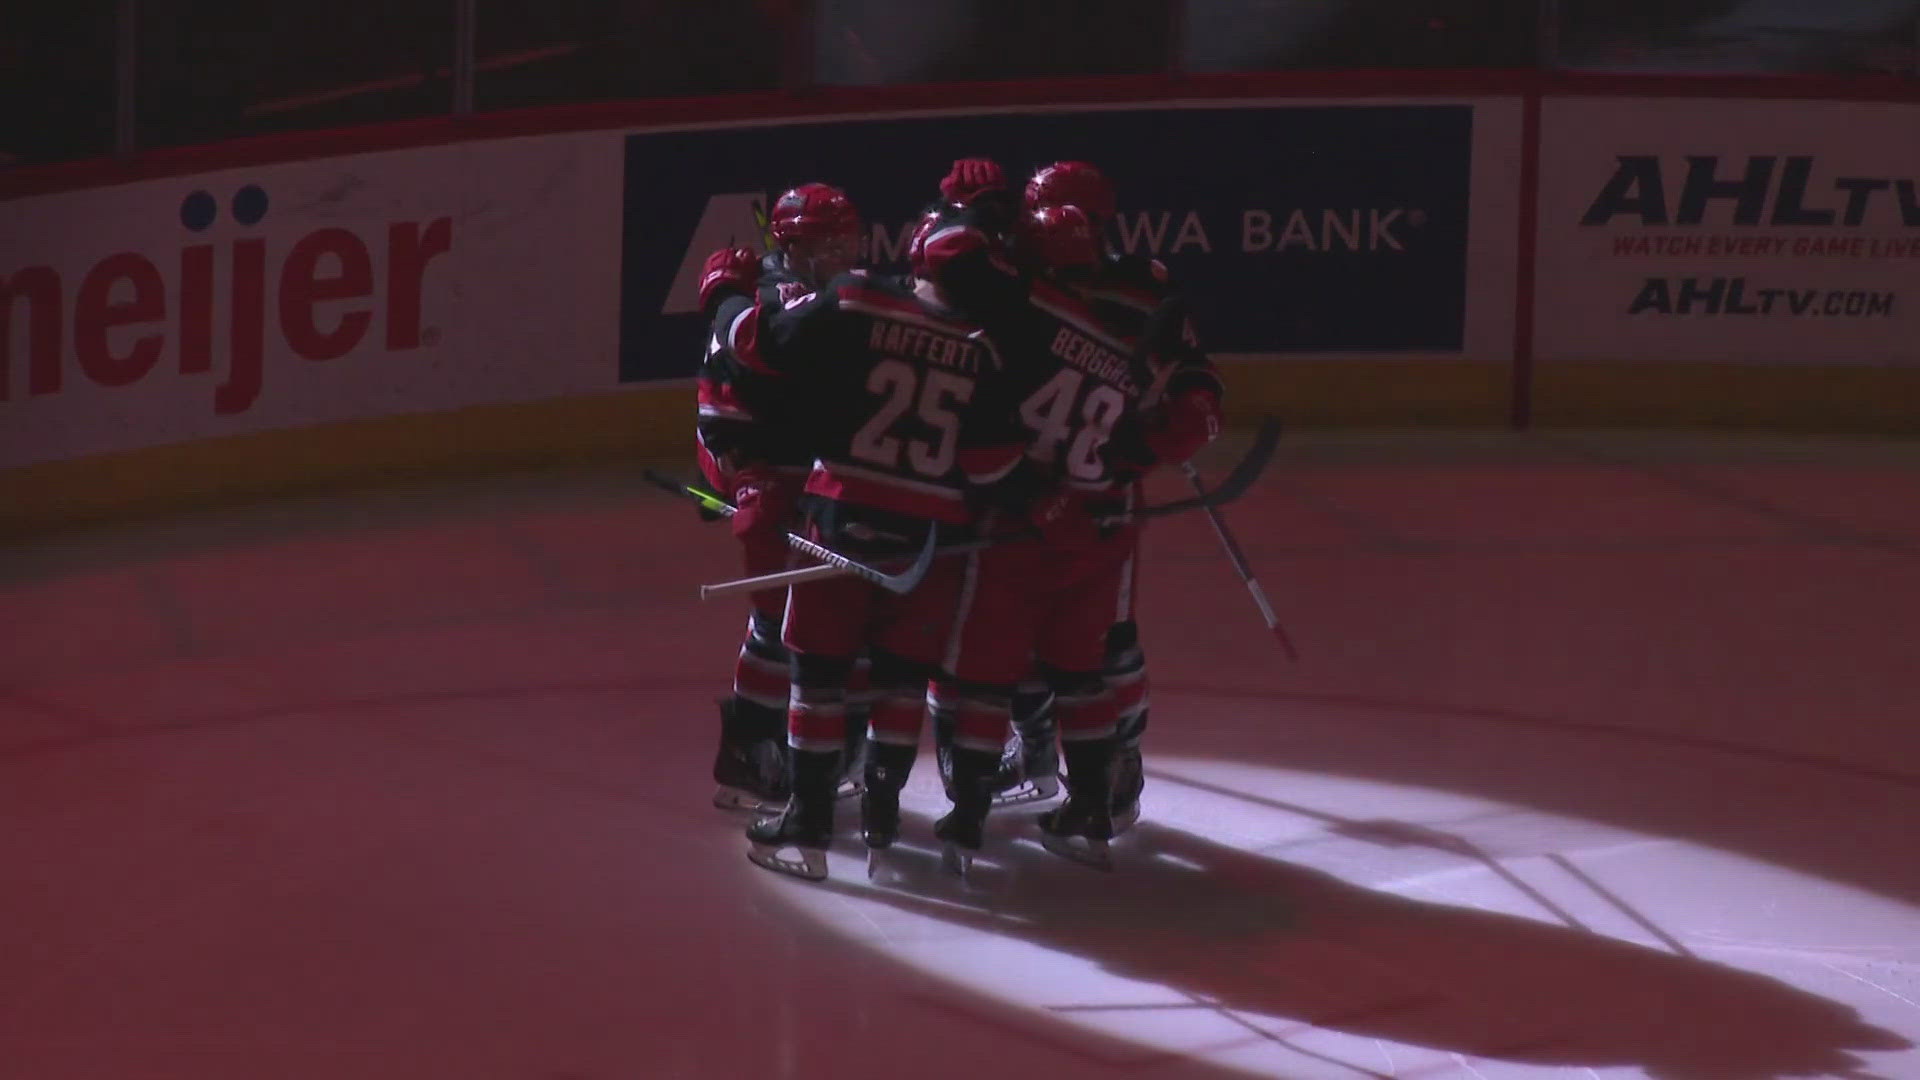 Jonathan Berggren scores in overtime to give Griffins 4-3 Game 3 victory